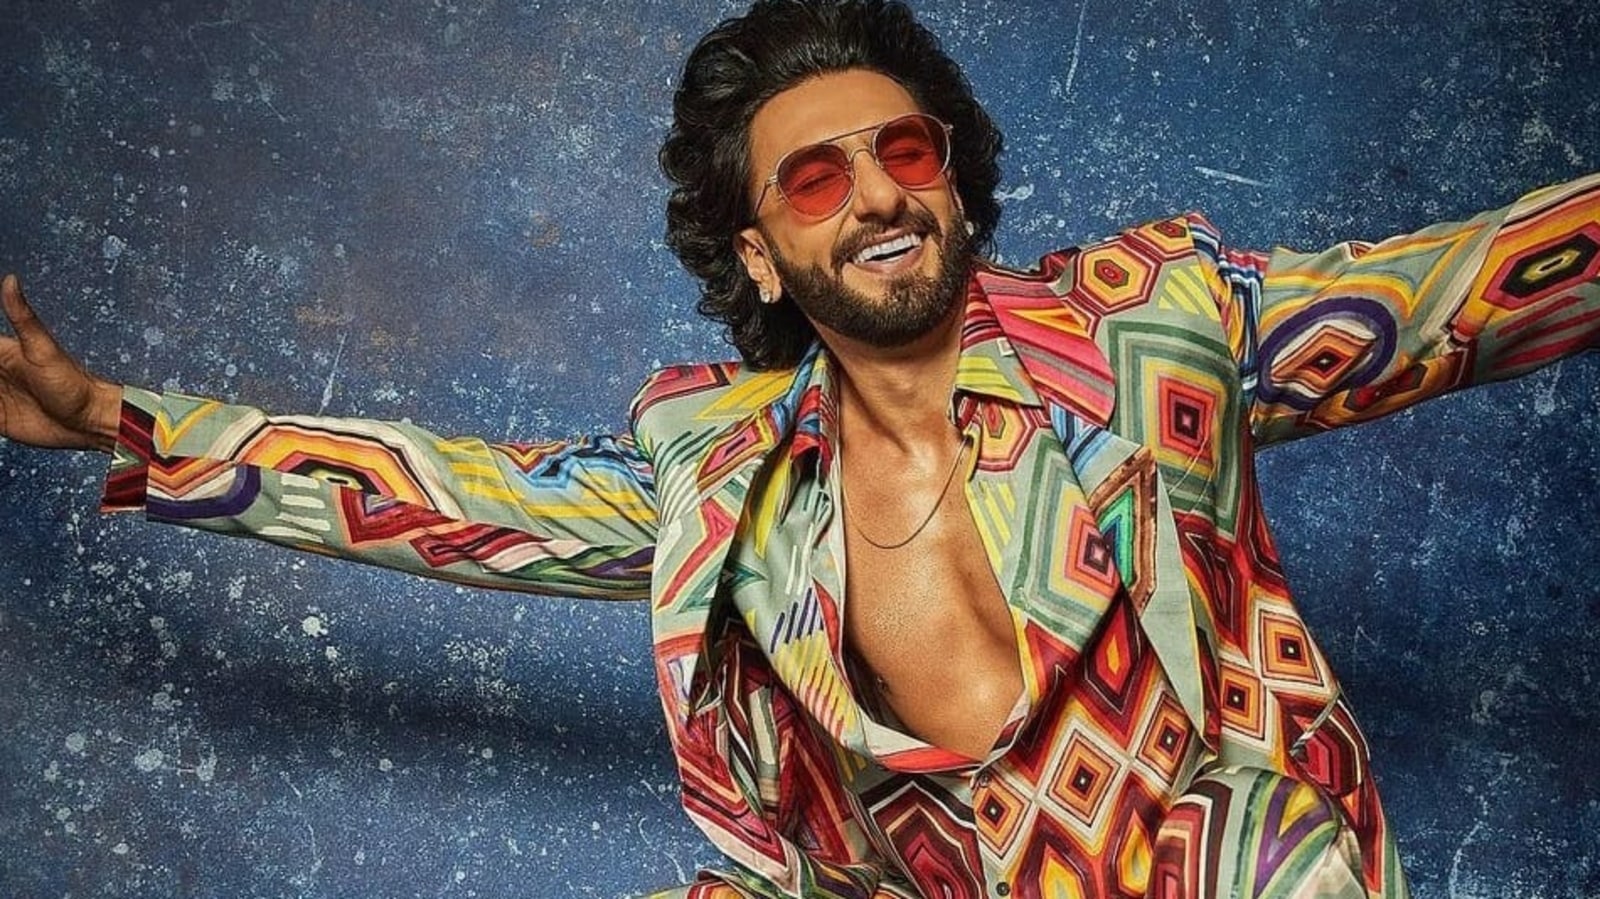 Times when Ranveer Singh shed his funky fashion choices and opted